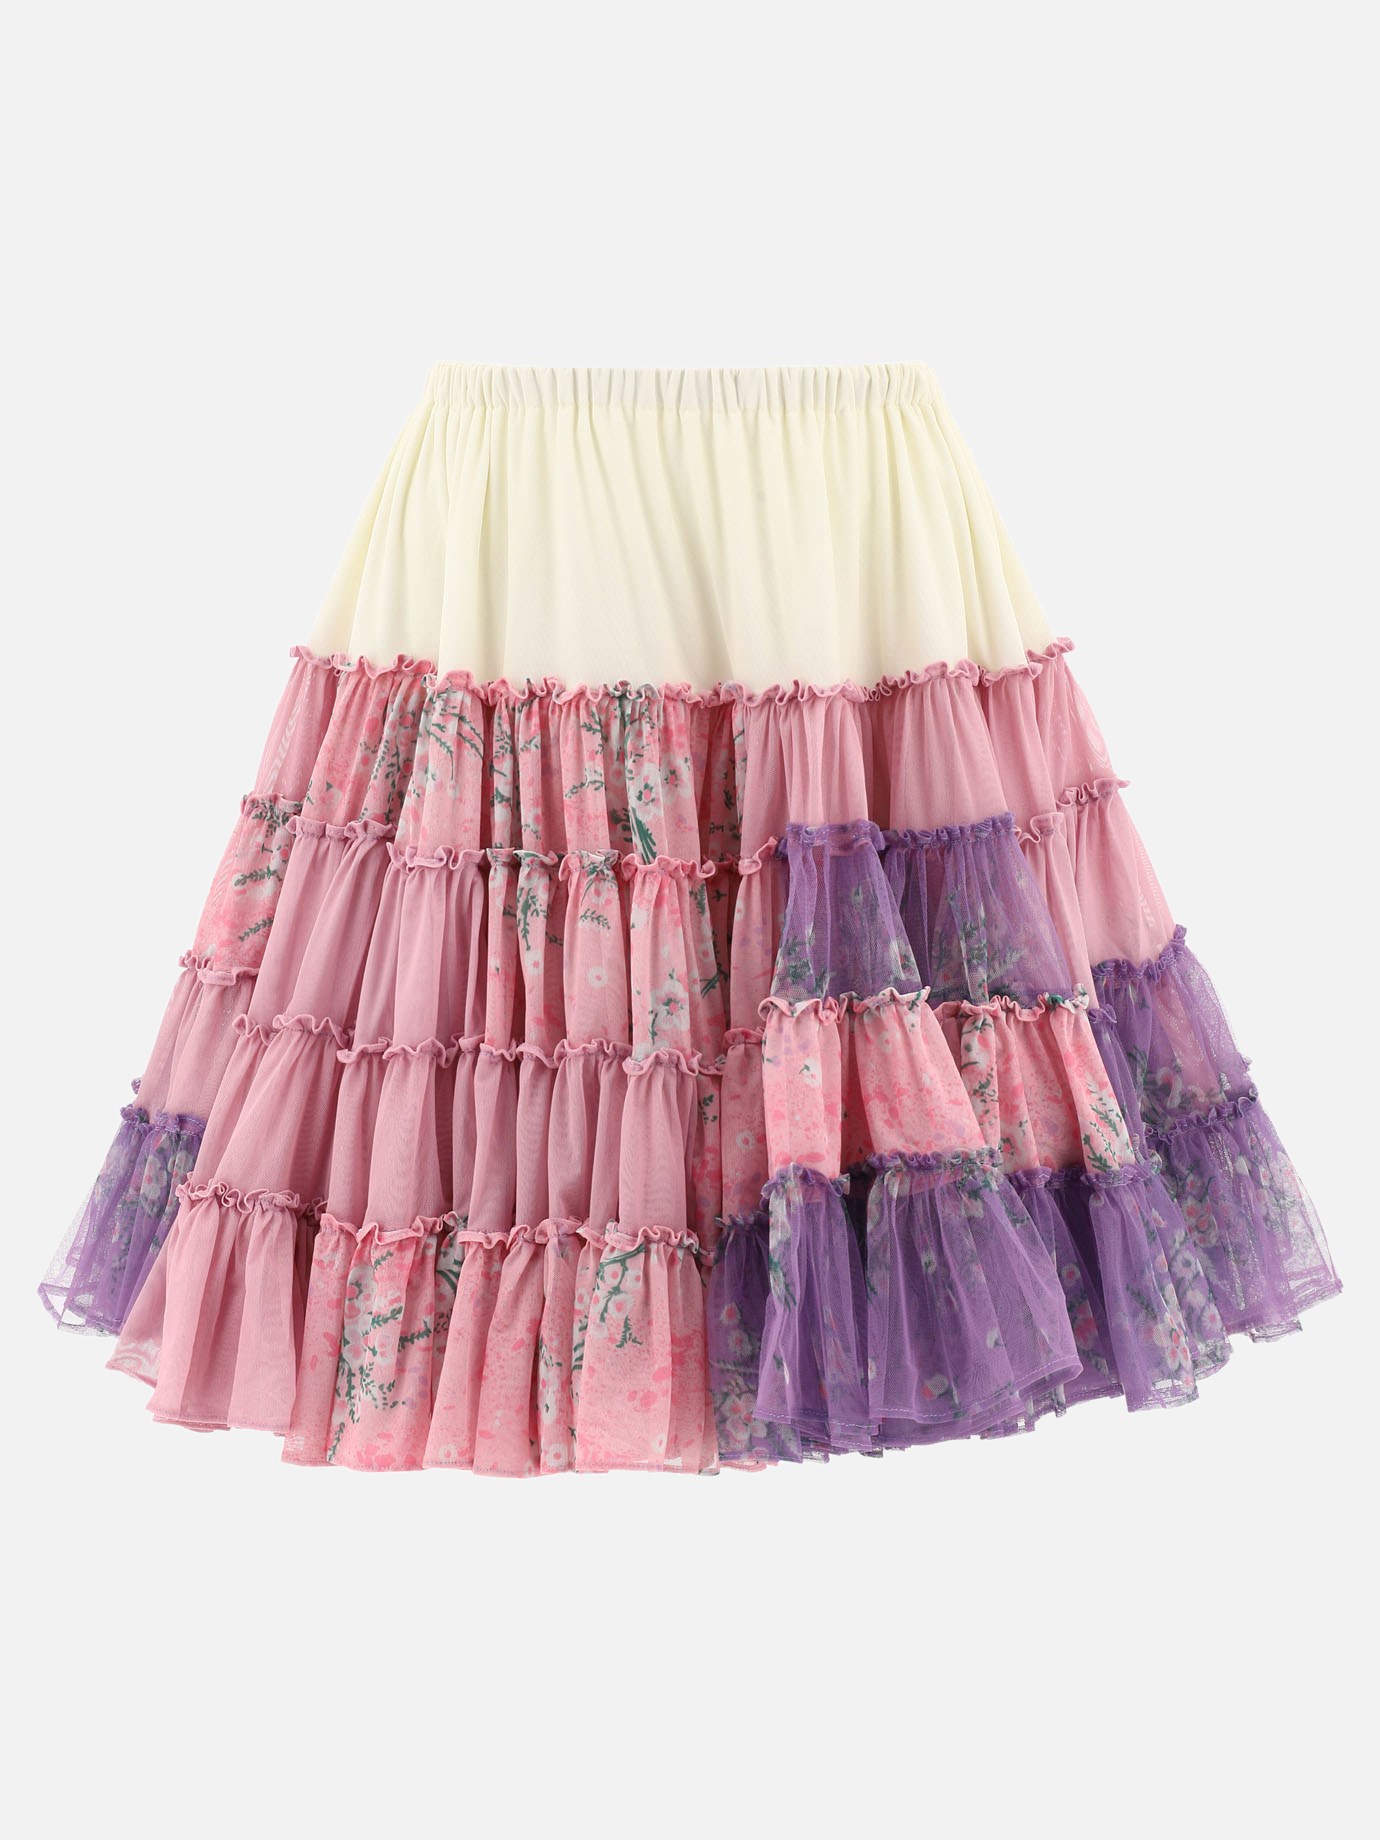 Floral skirt with flouncesby ERL - 0